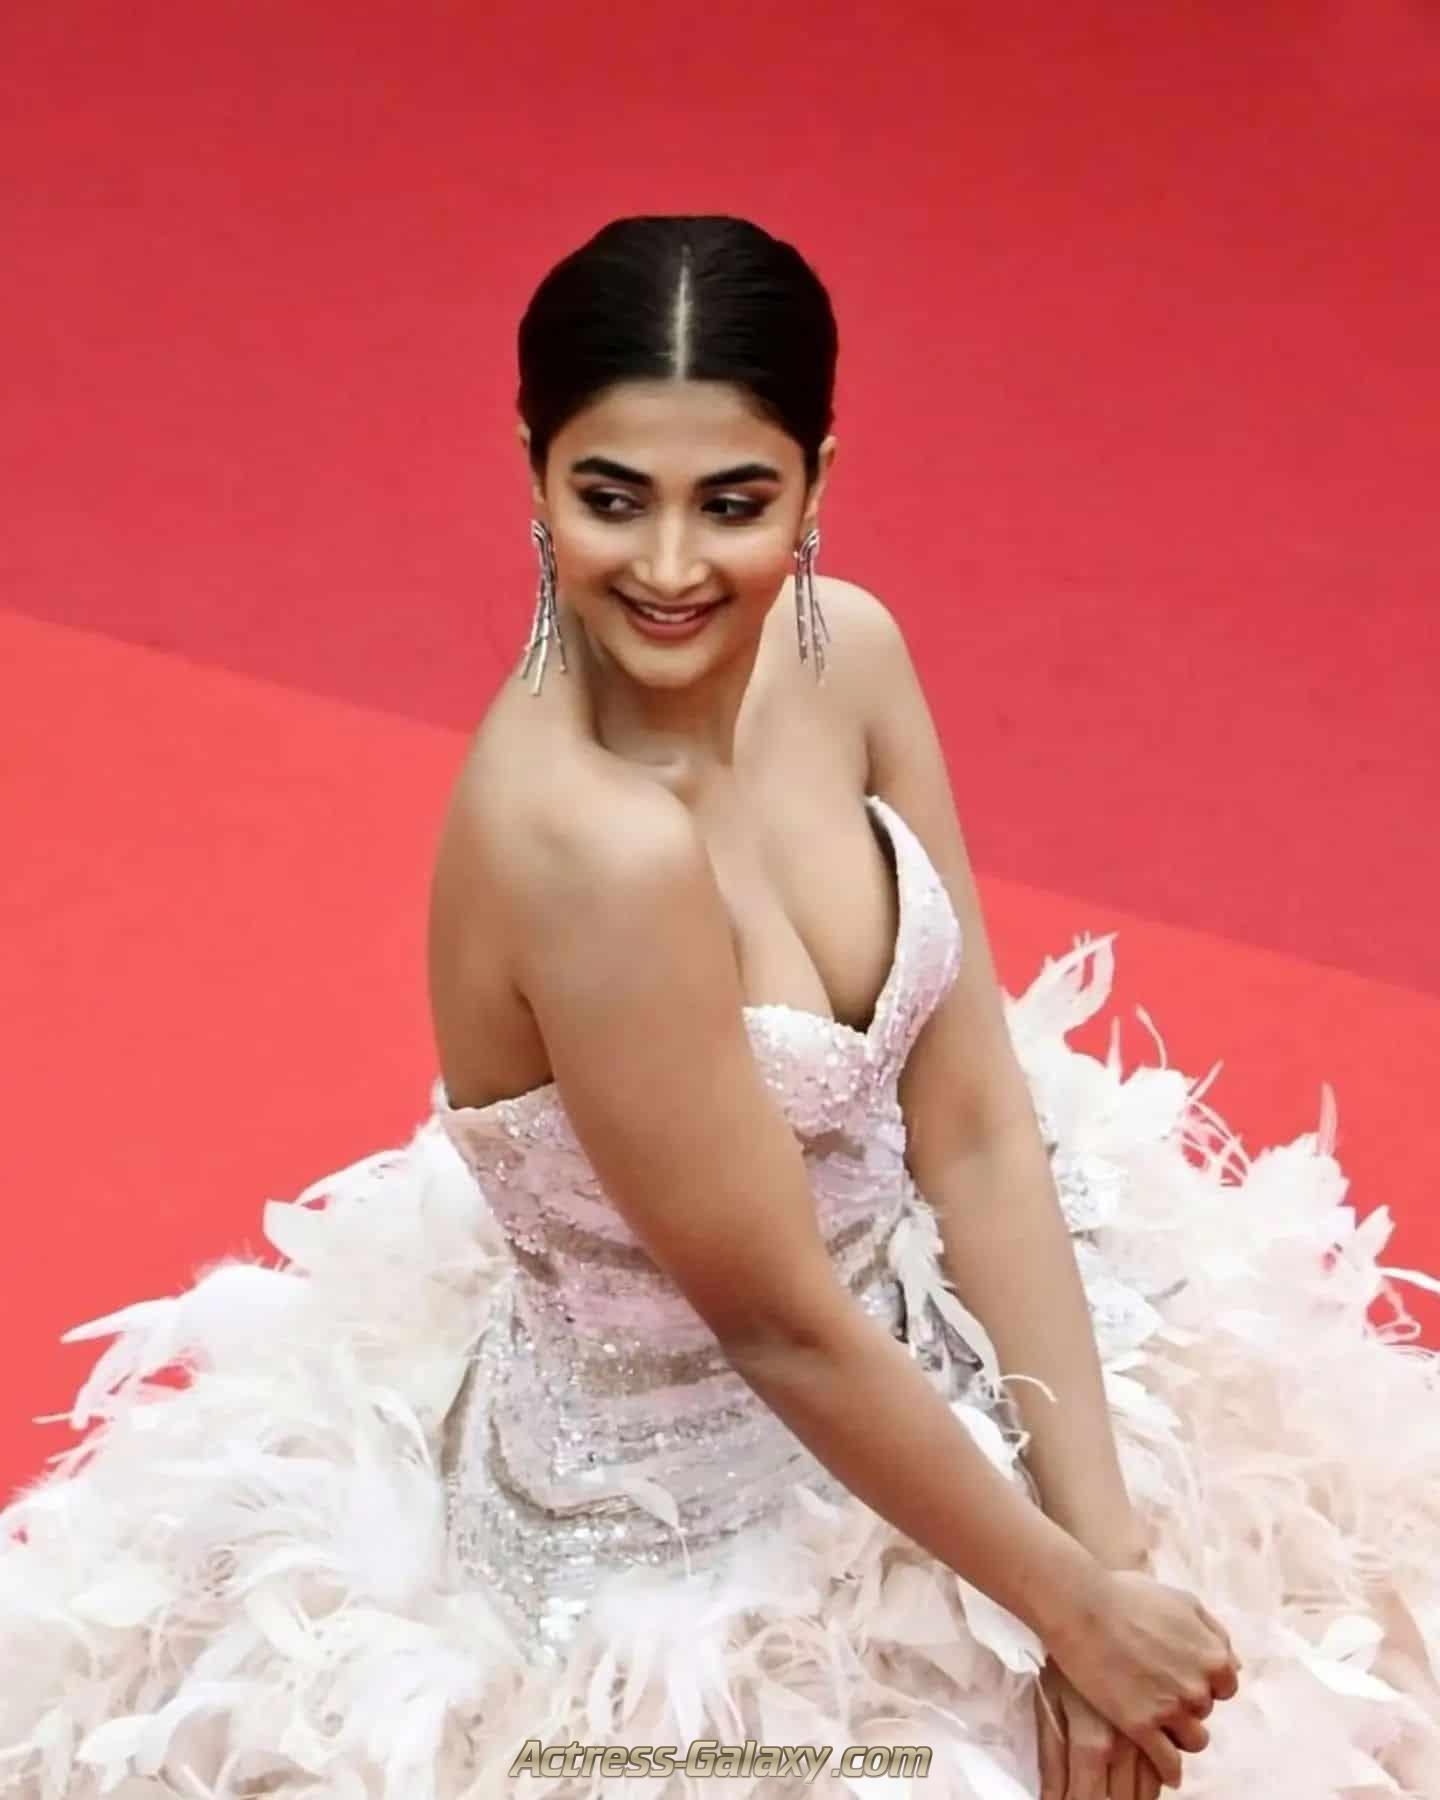 Pooja Hegde Sizzling Hot photos in red carpet at cannes